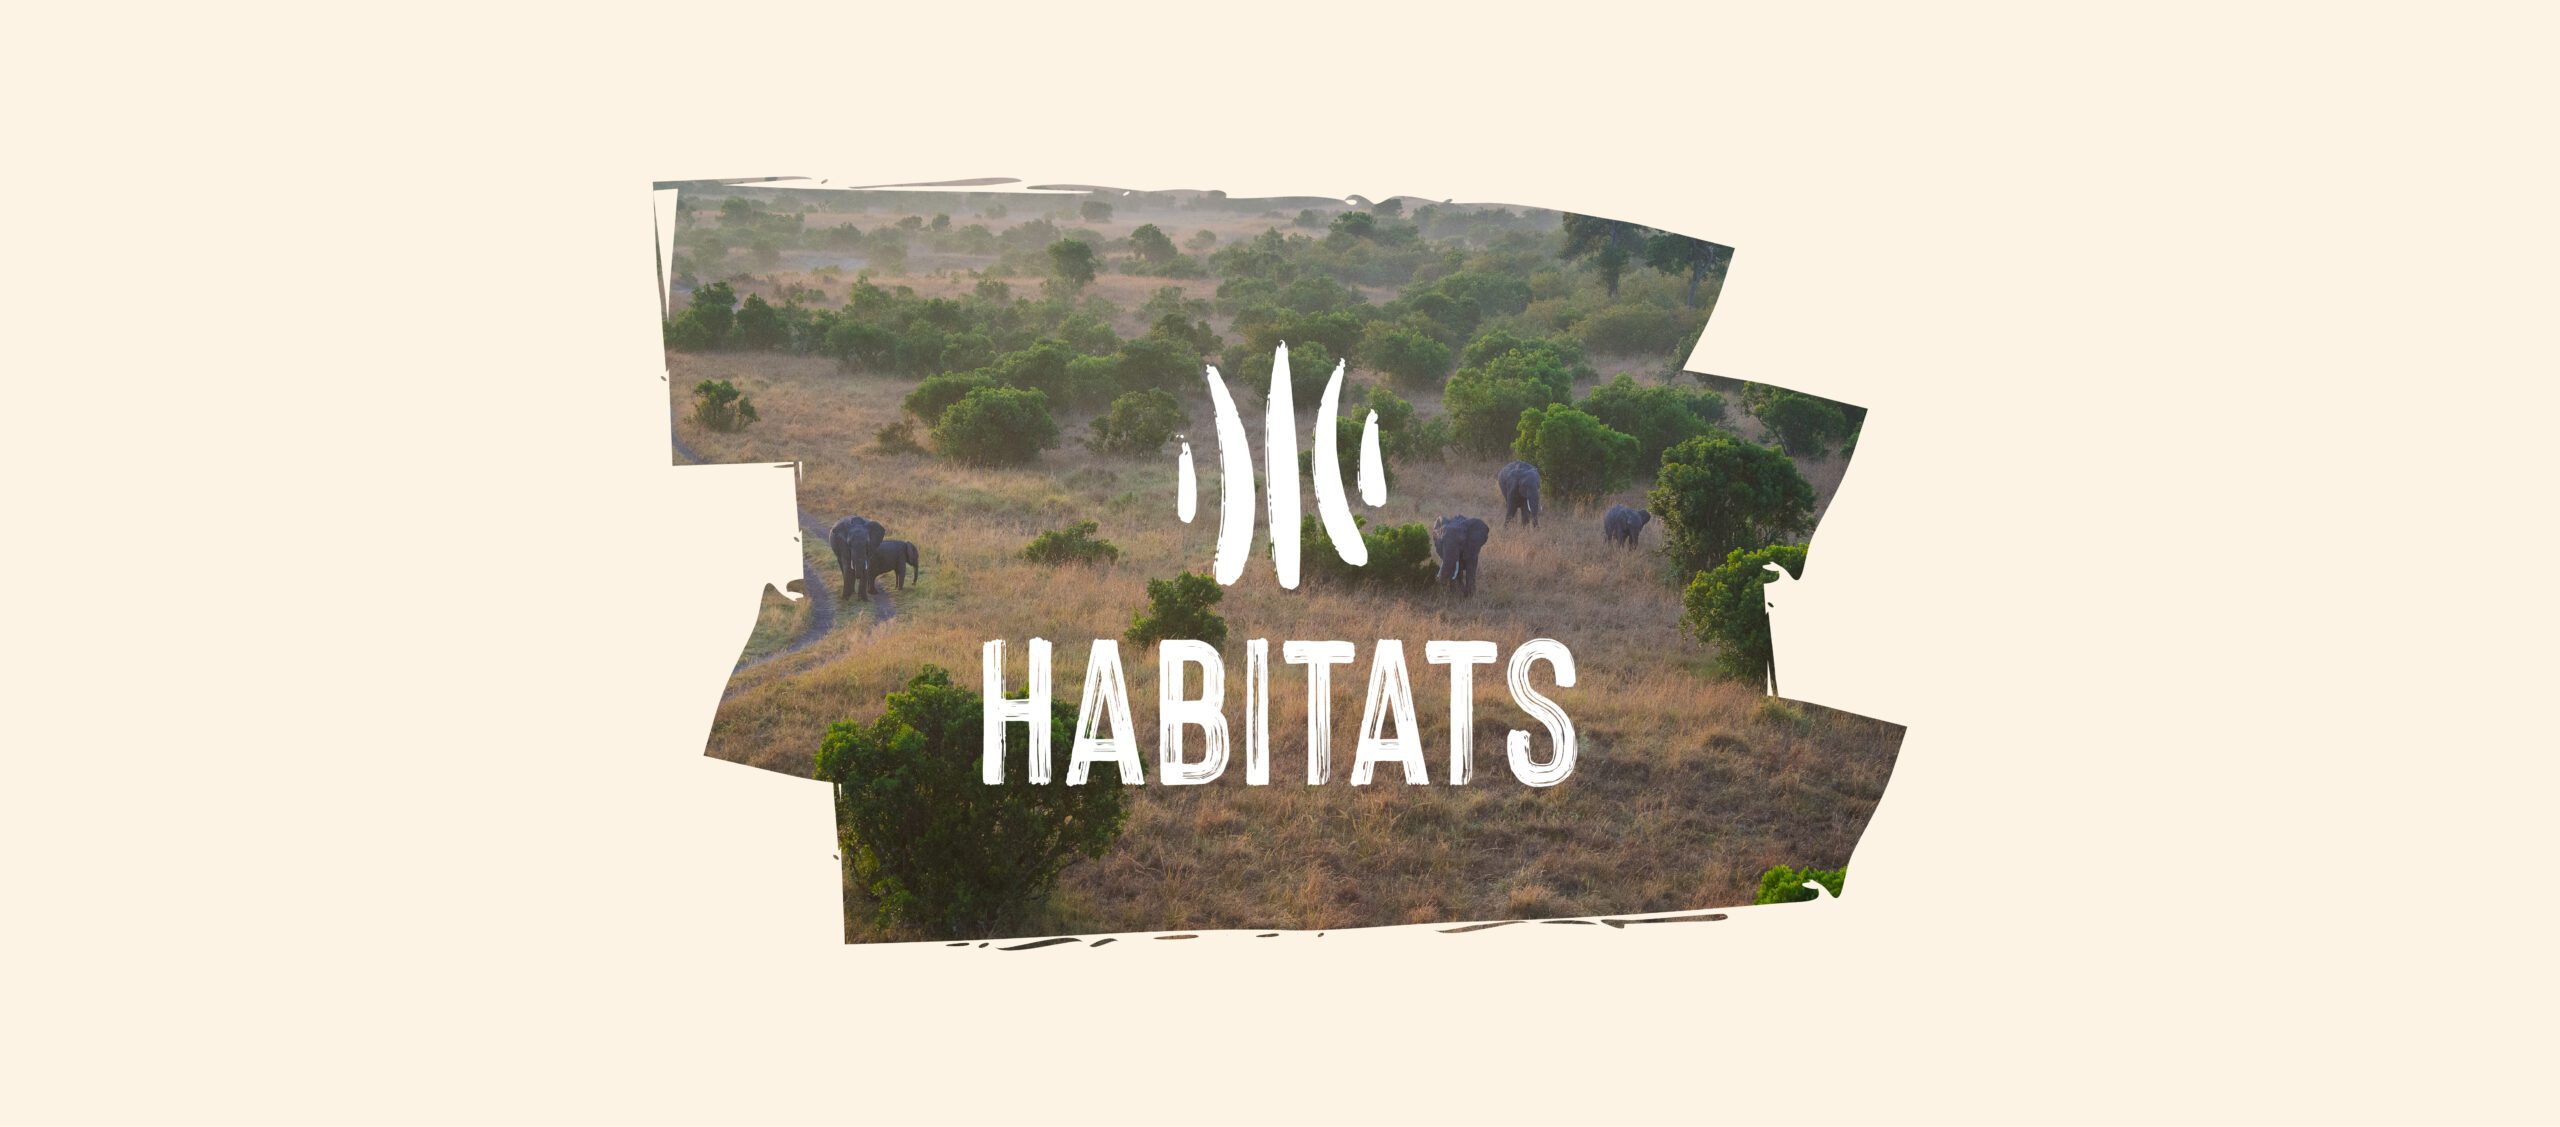 Habitats is a non-profit focused on biodiversity conservation and restoration